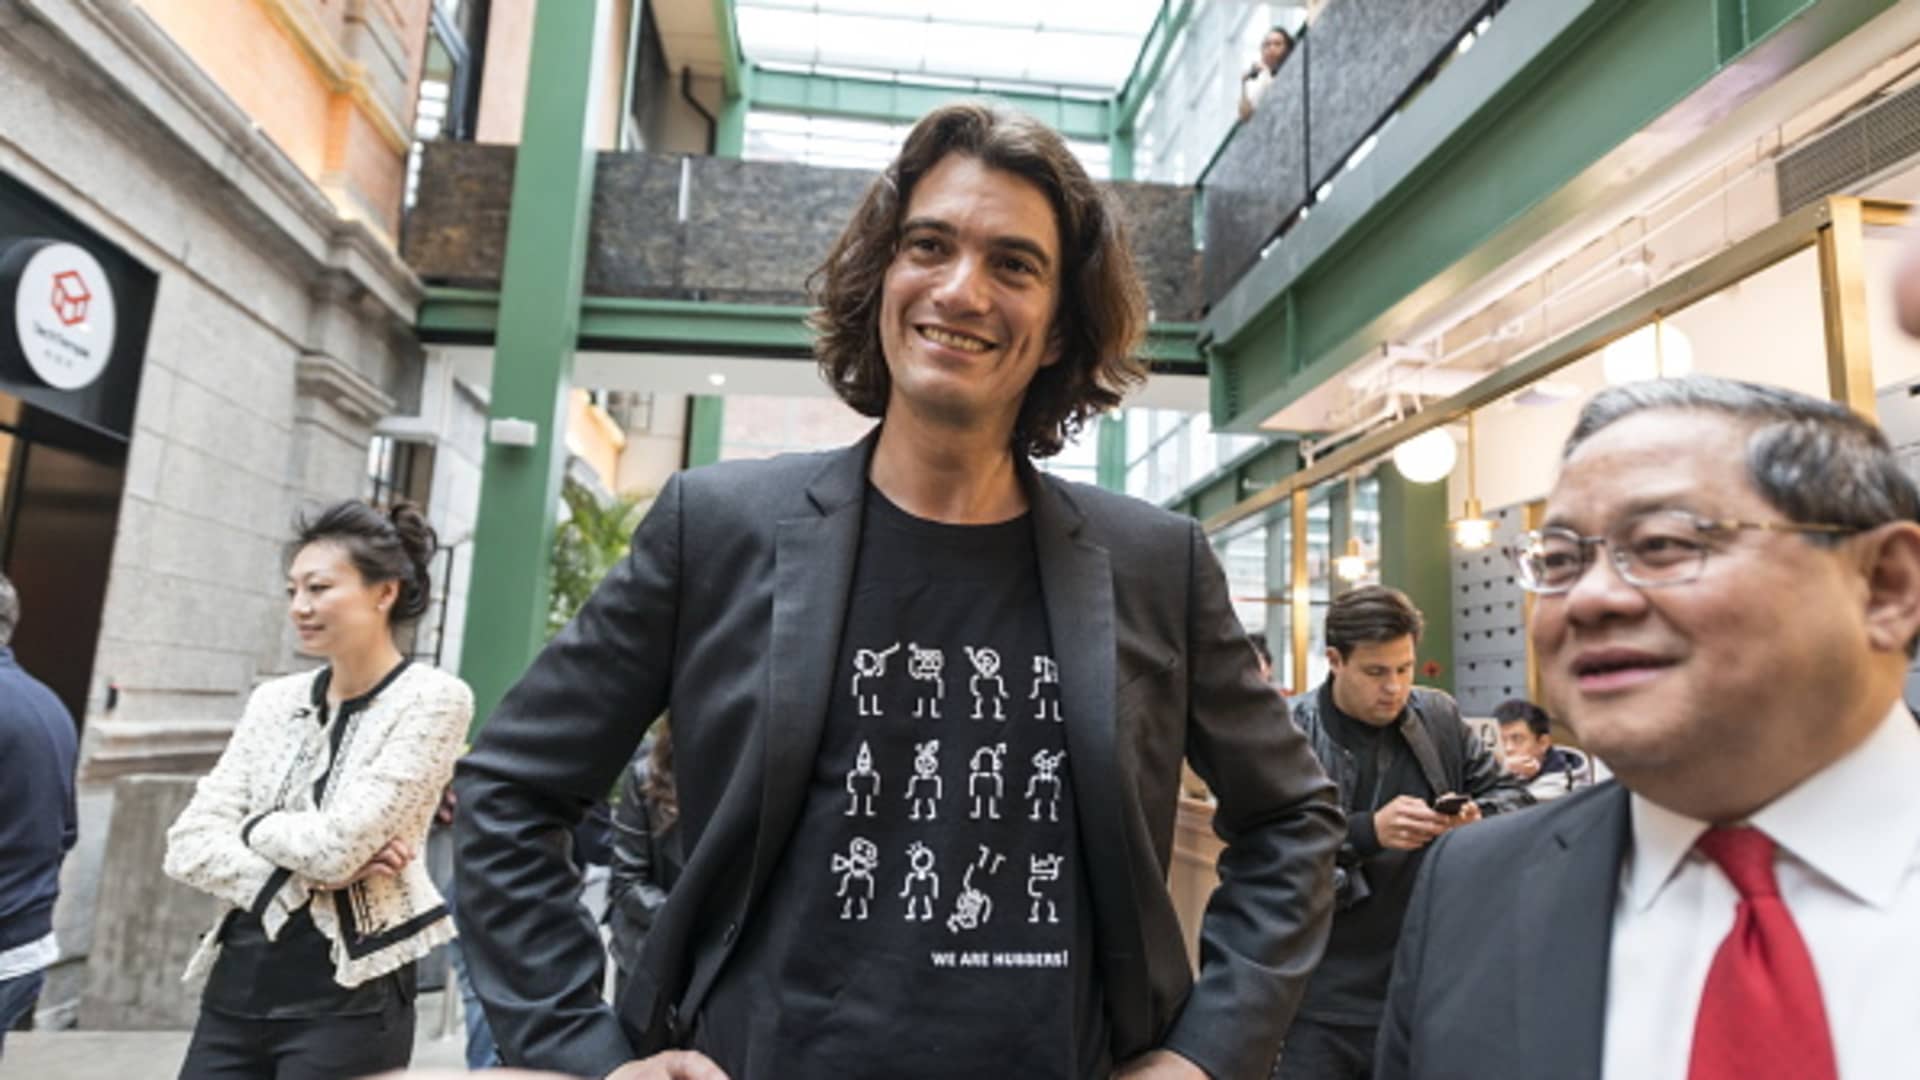 Adam Neumann makes a $500 million bid for WeWork; it could hit $900 million if financing and diligence firm up